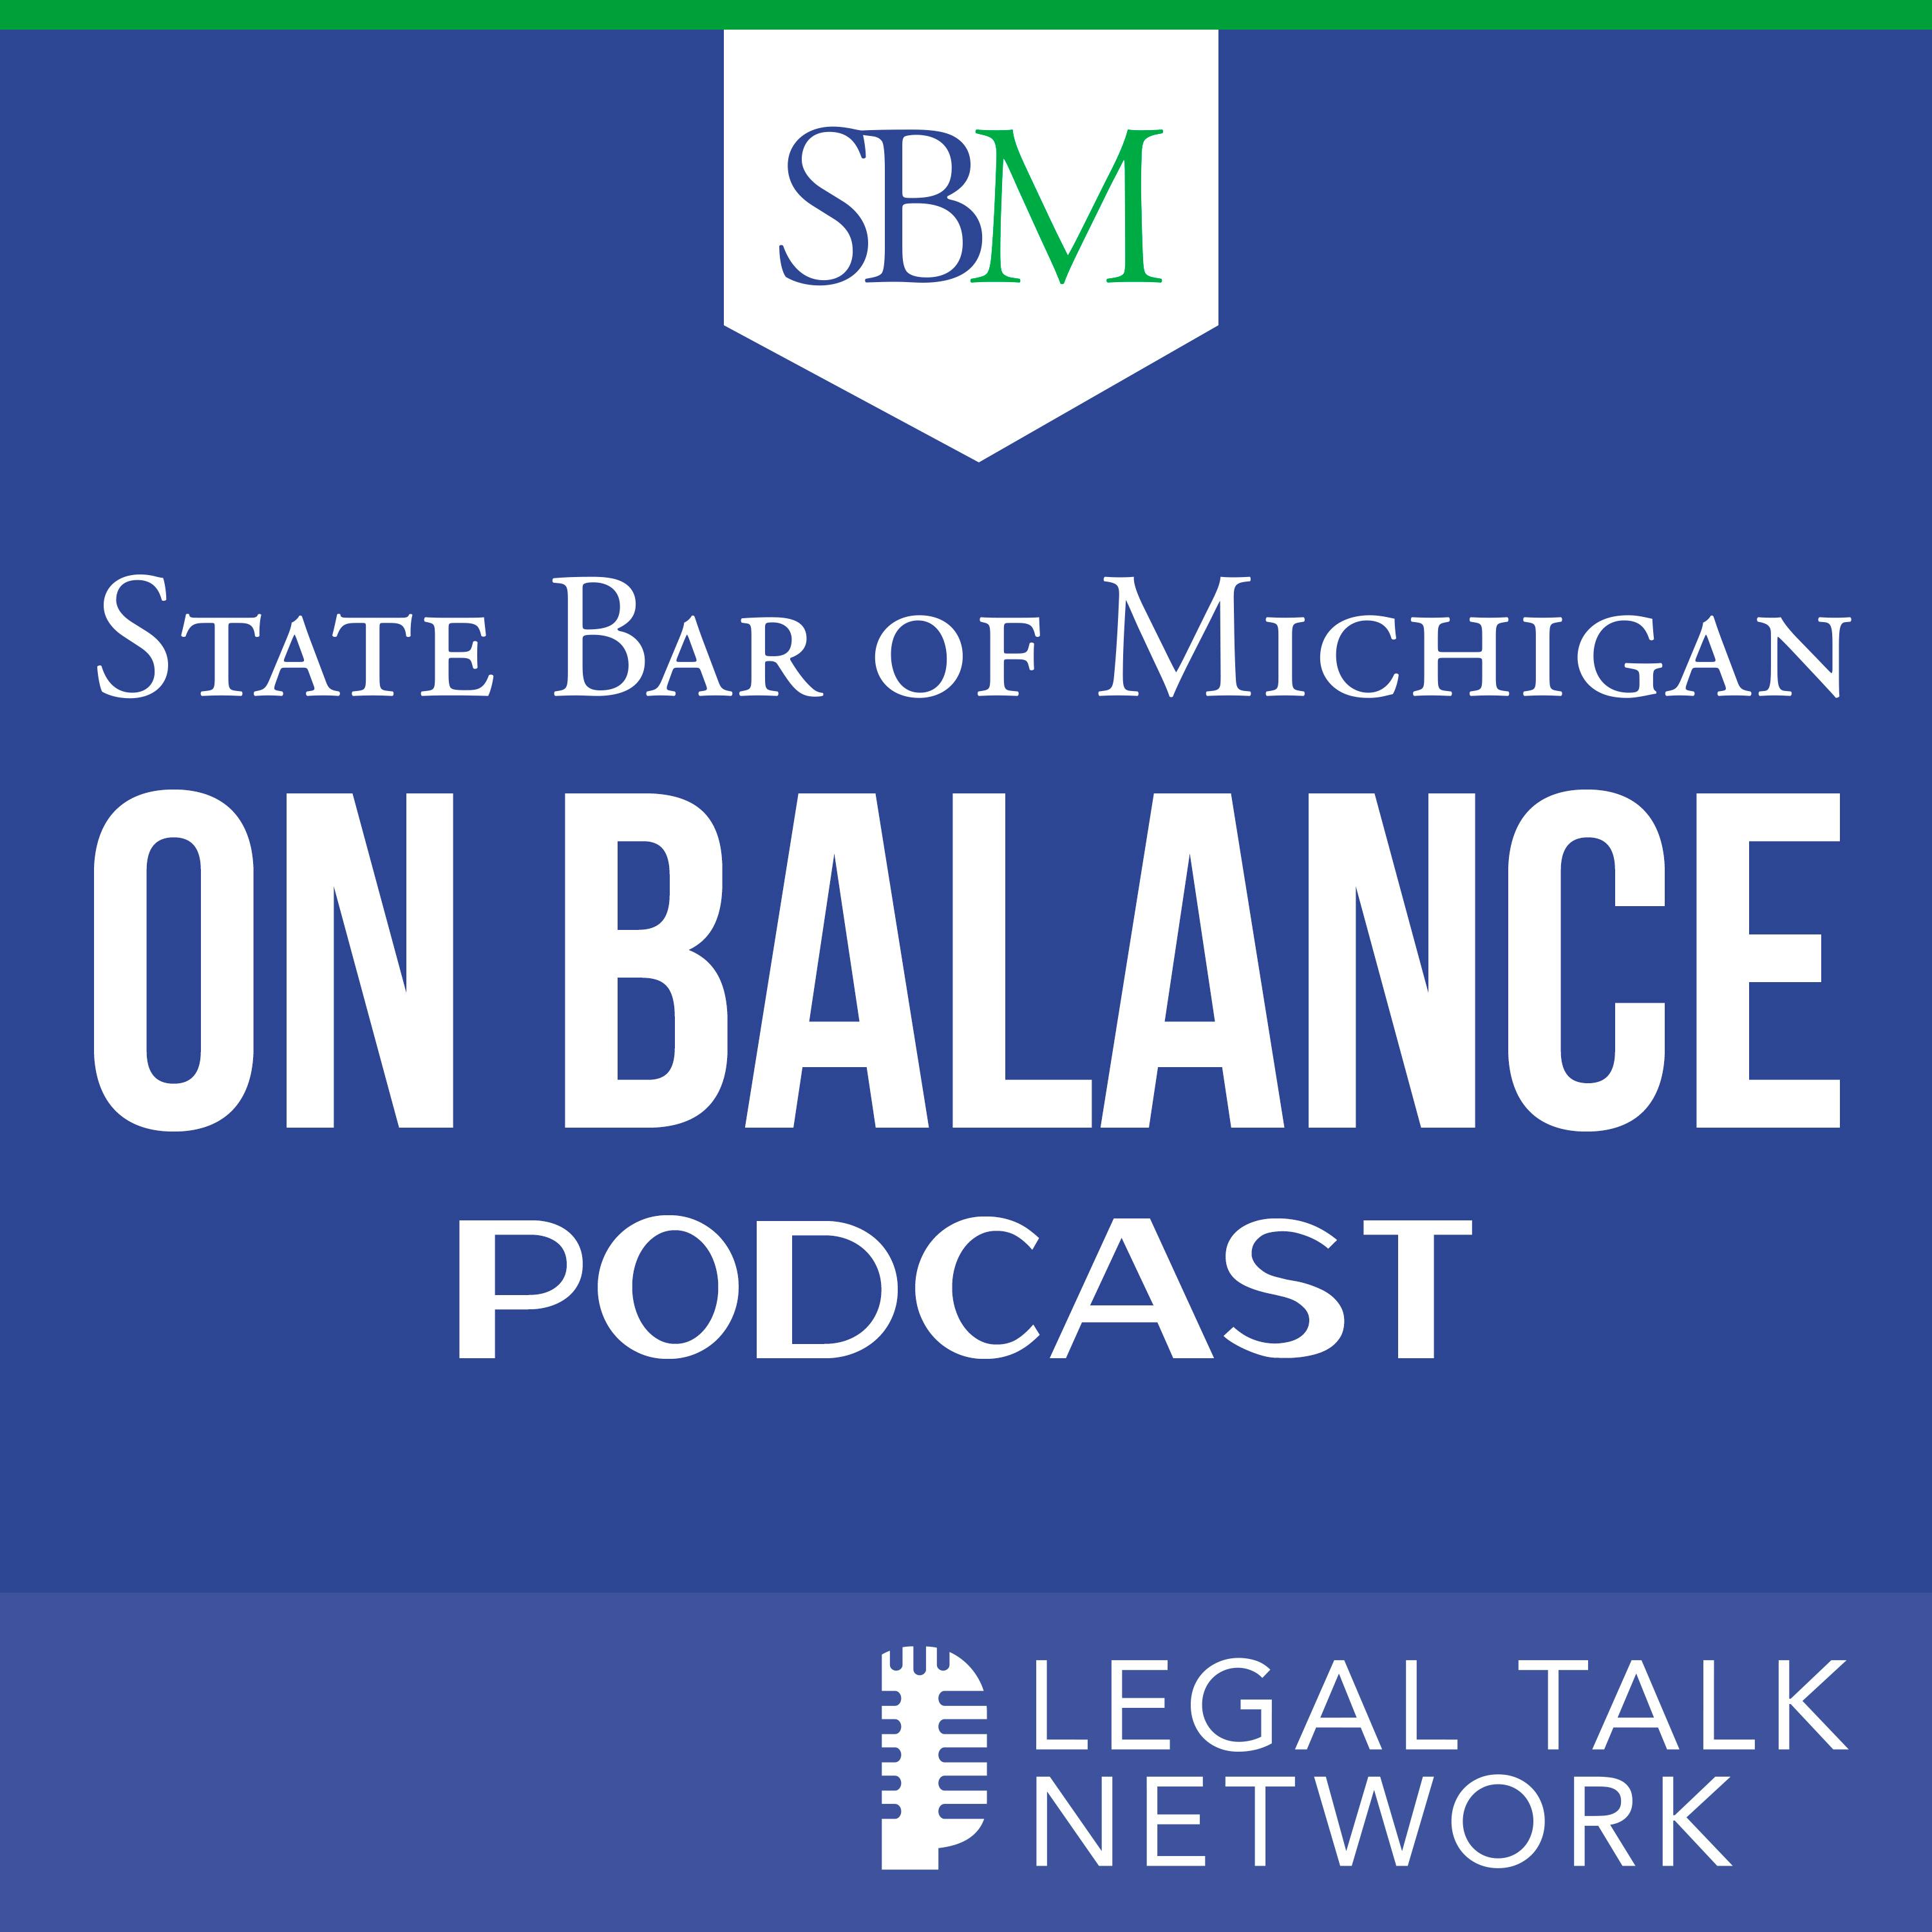 State Bar of Michigan NEXT Conference 2018: A Spotlight On Access To Justice